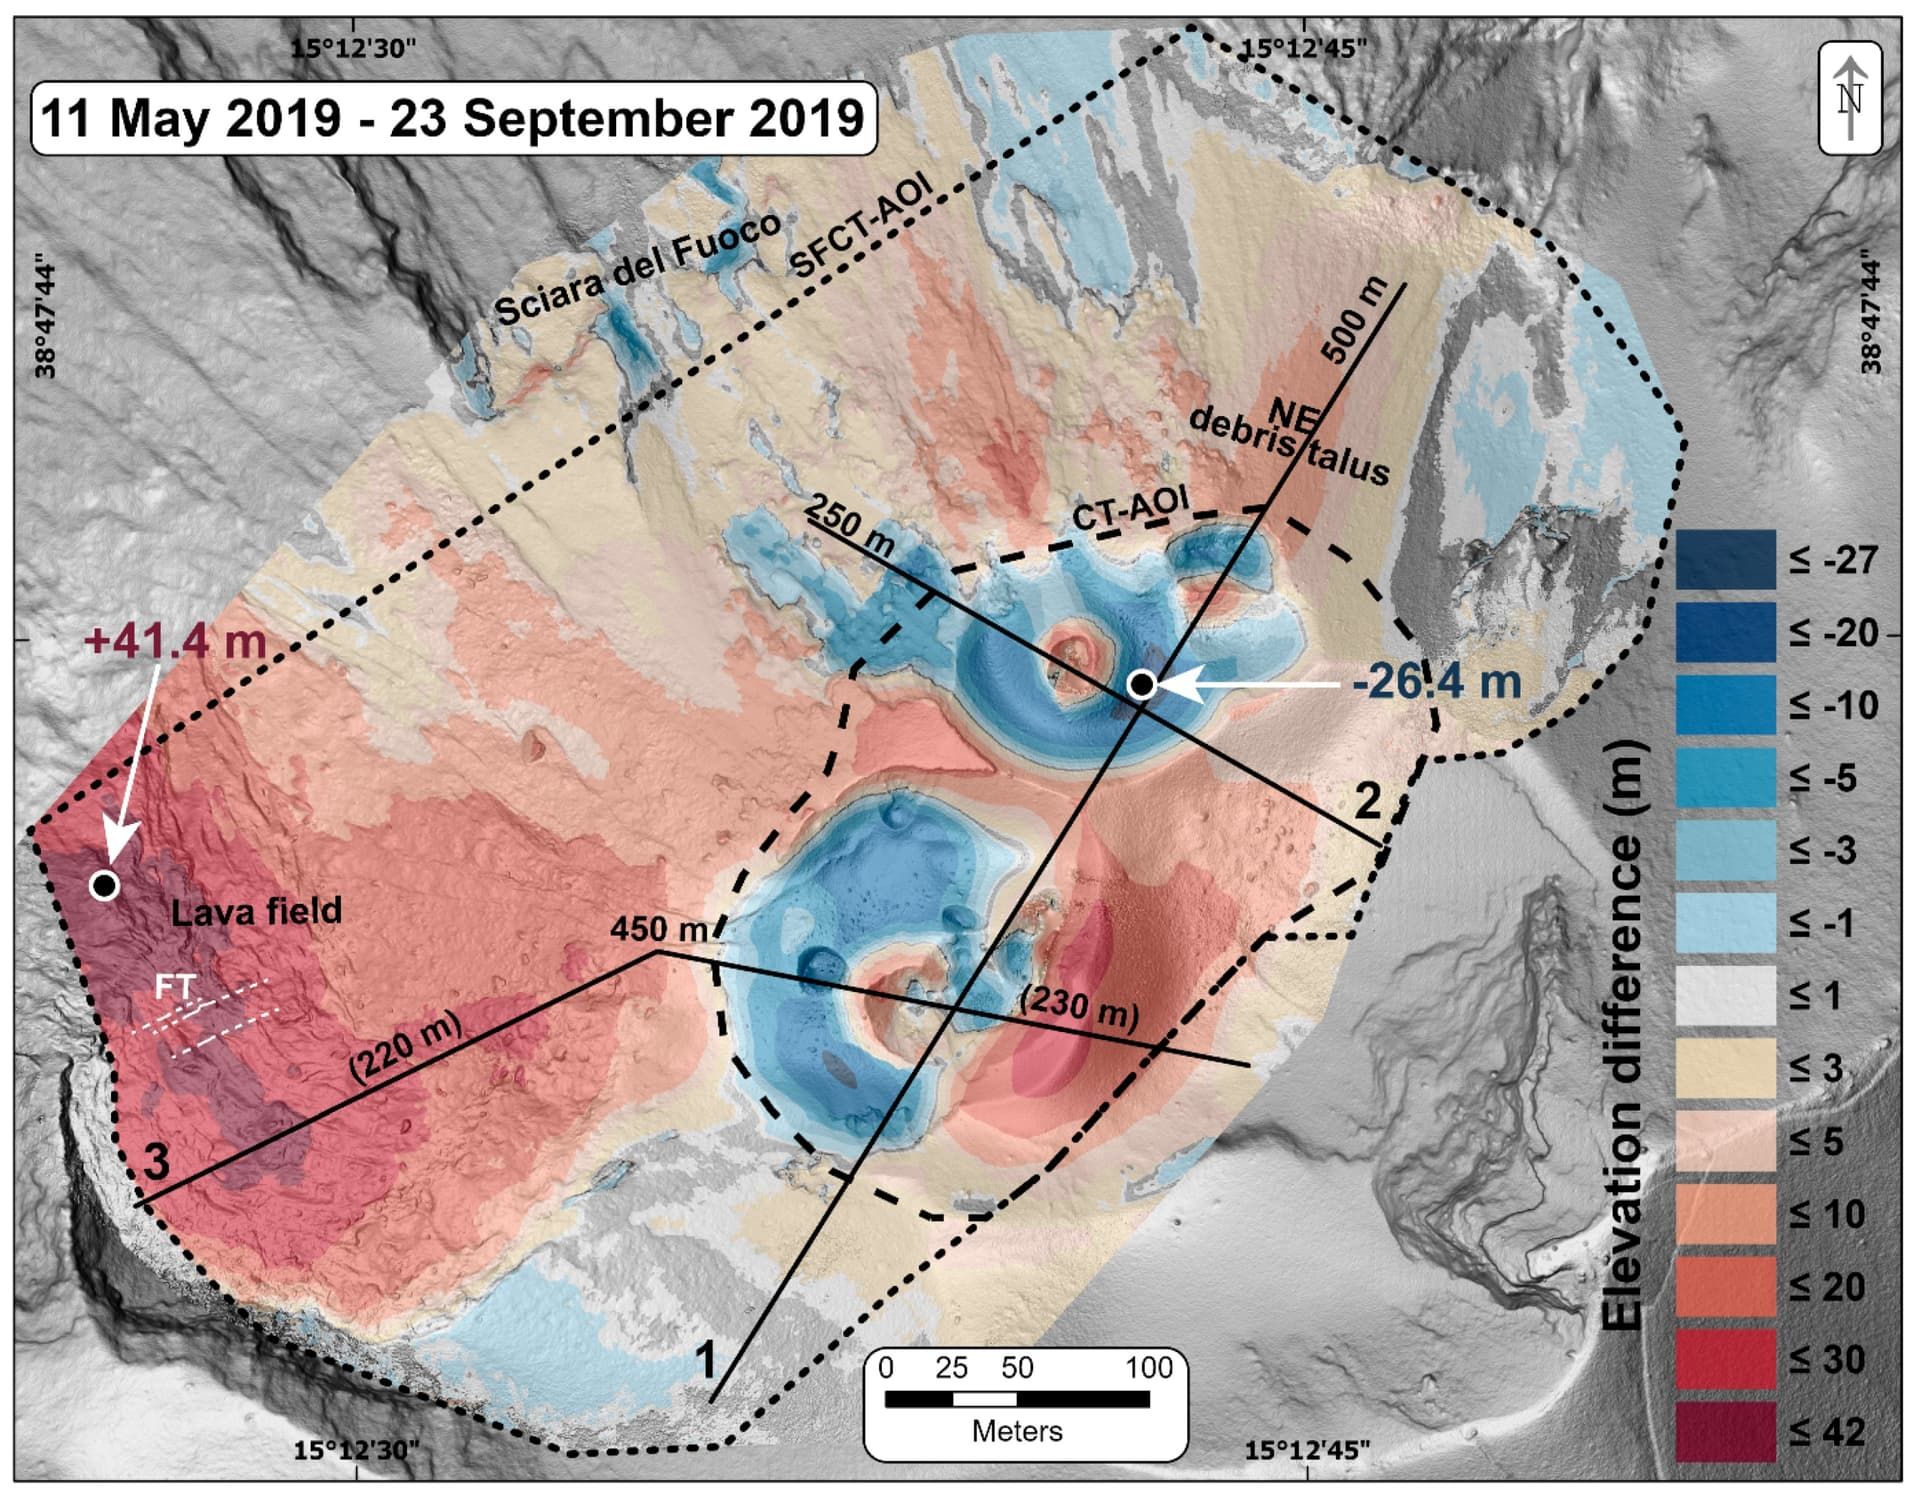 Open Access Article - Unoccupied Aircraft Systems (UASs) Reveal the Morphological Changes at Stromboli Volcano